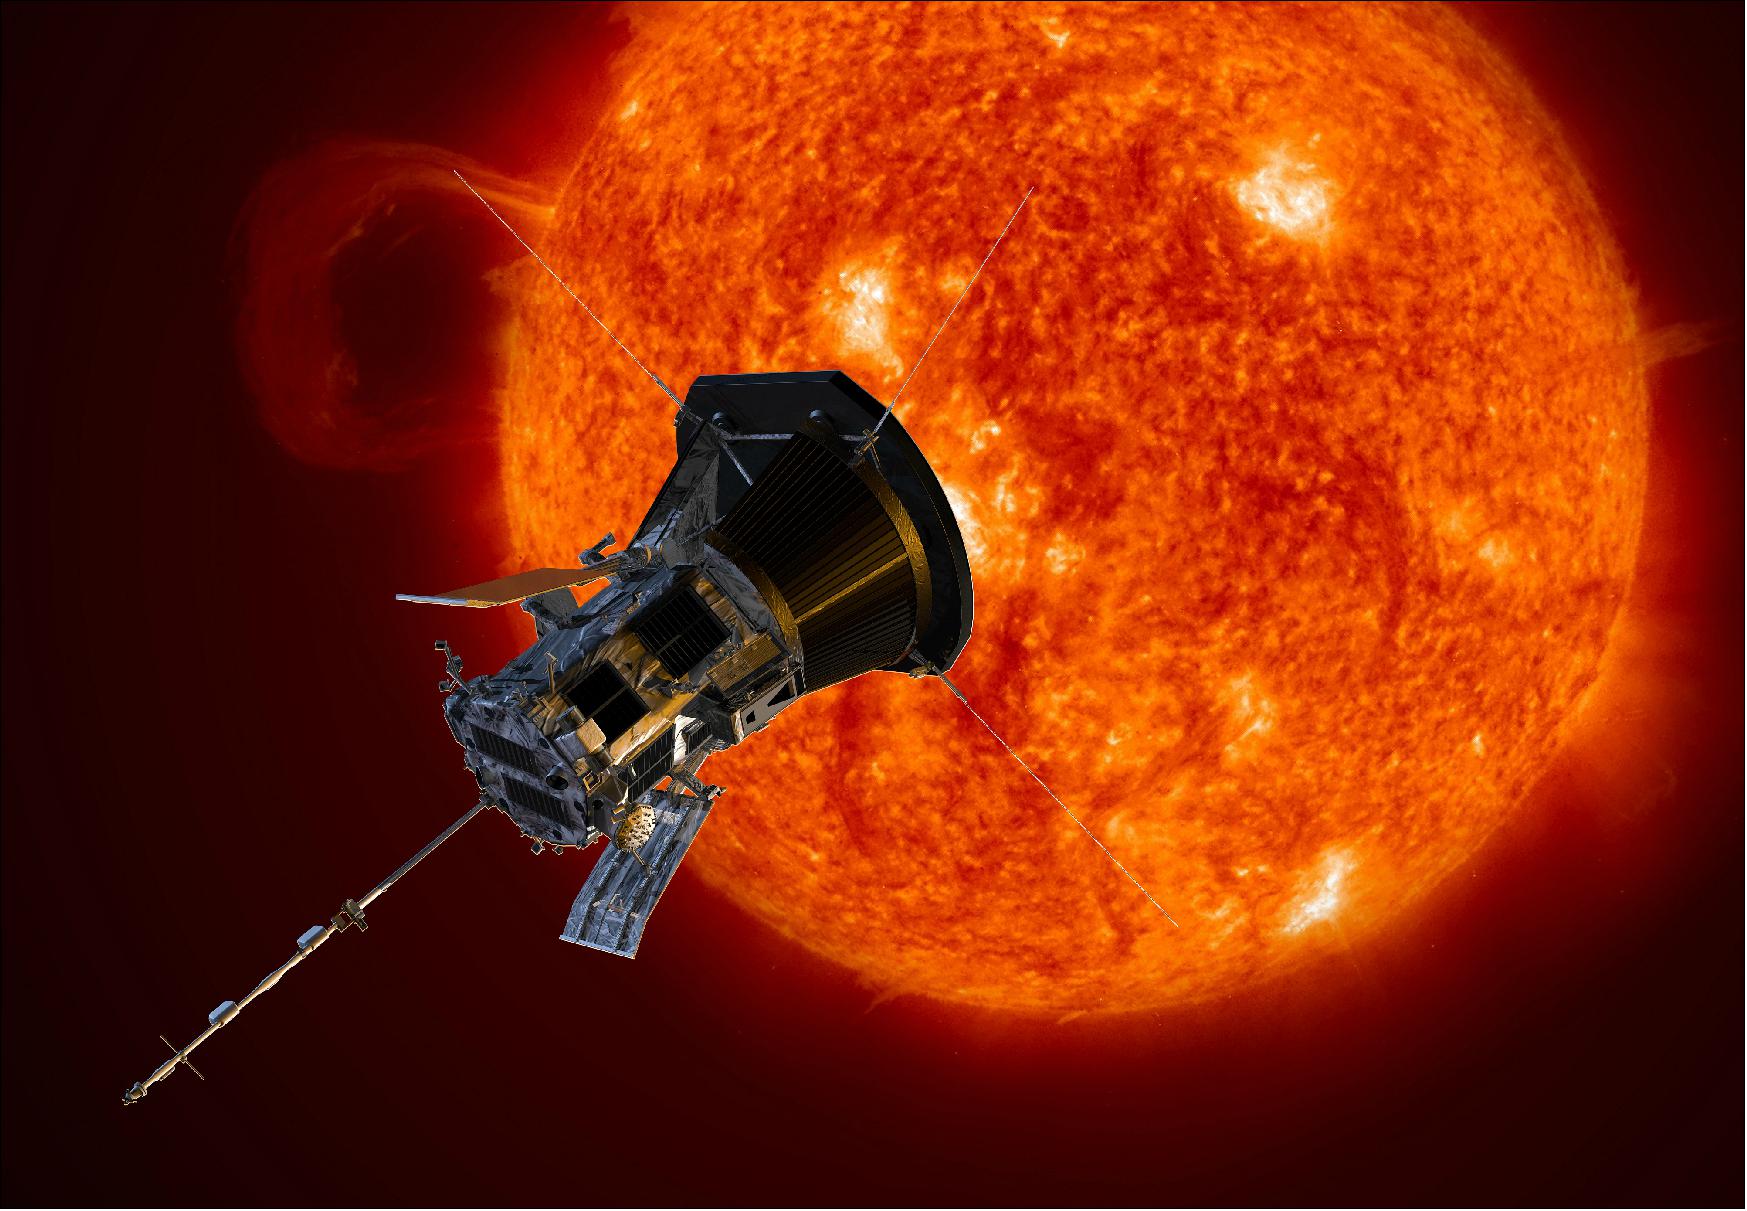 Figure 5: This illustration of NASA's Parker Solar Probe depicts the spacecraft traveling through the Sun's outer atmosphere (image credit: JHU/APL)